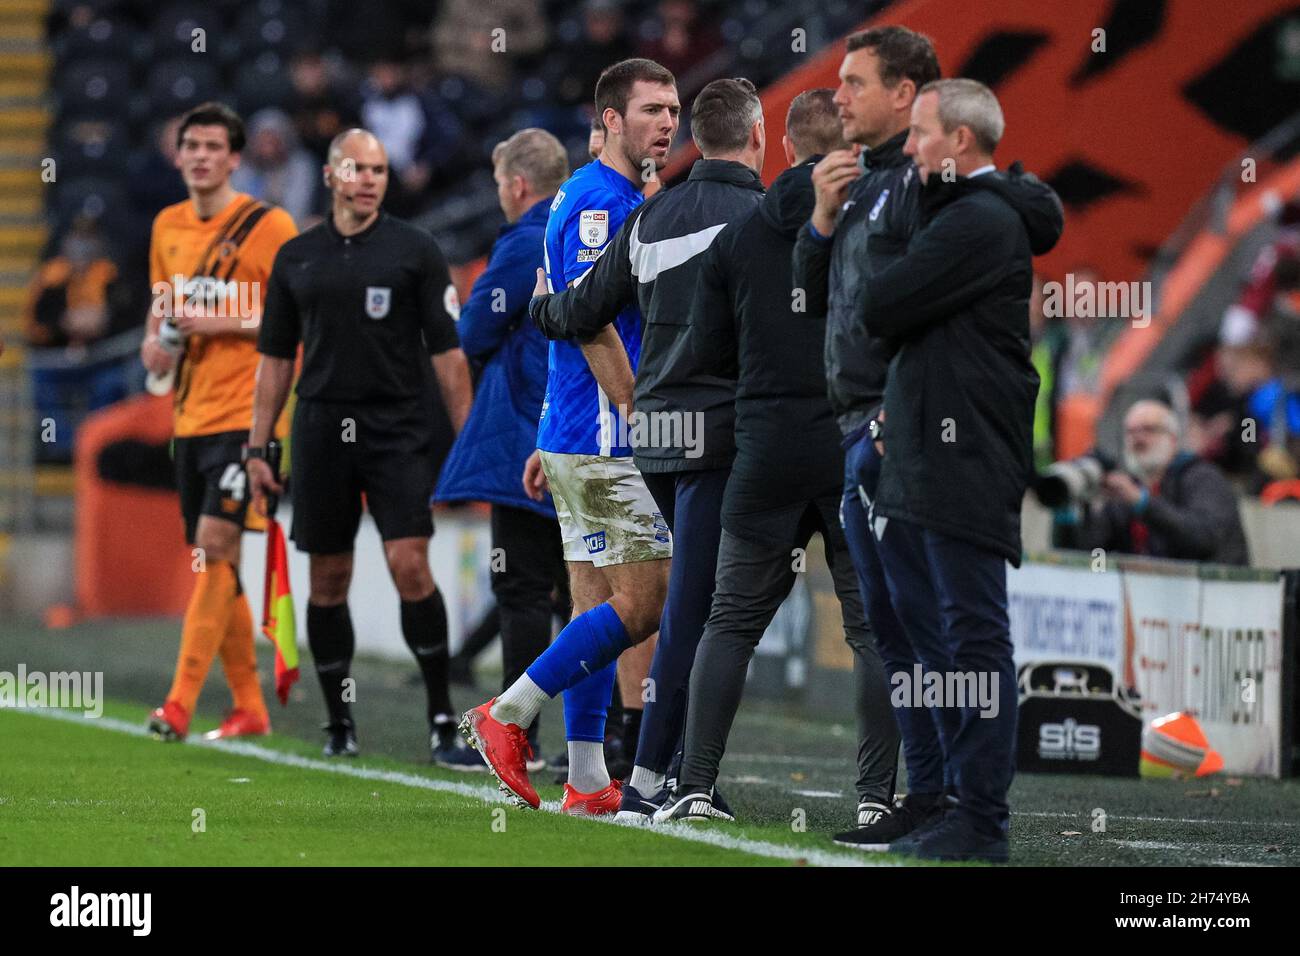 Gary Gardner #20 of Birmingham City is escorted off the pitch after receiving a red card in the first half Stock Photo